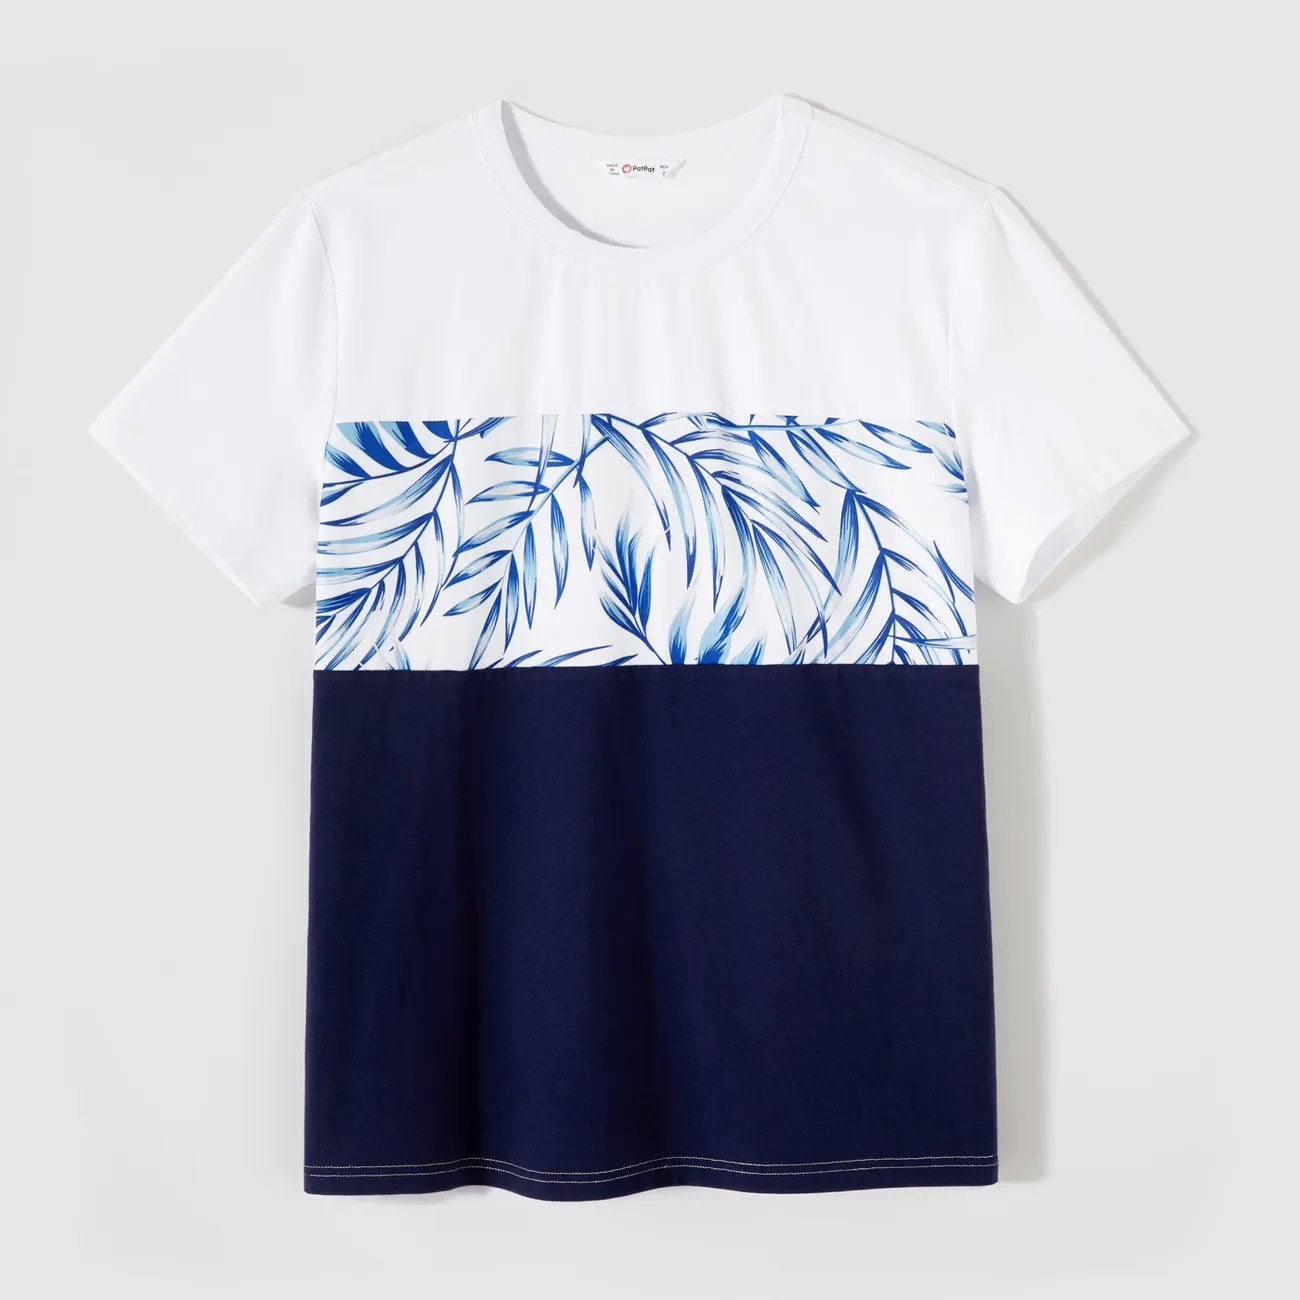 Family Matching Allover Palm Leaf Print & Solid Spliced Surplice Neck Flutter-sleeve Dresses and Colorblock Short-sleeve T-shirts Sets sapphirebluewhite big image 1